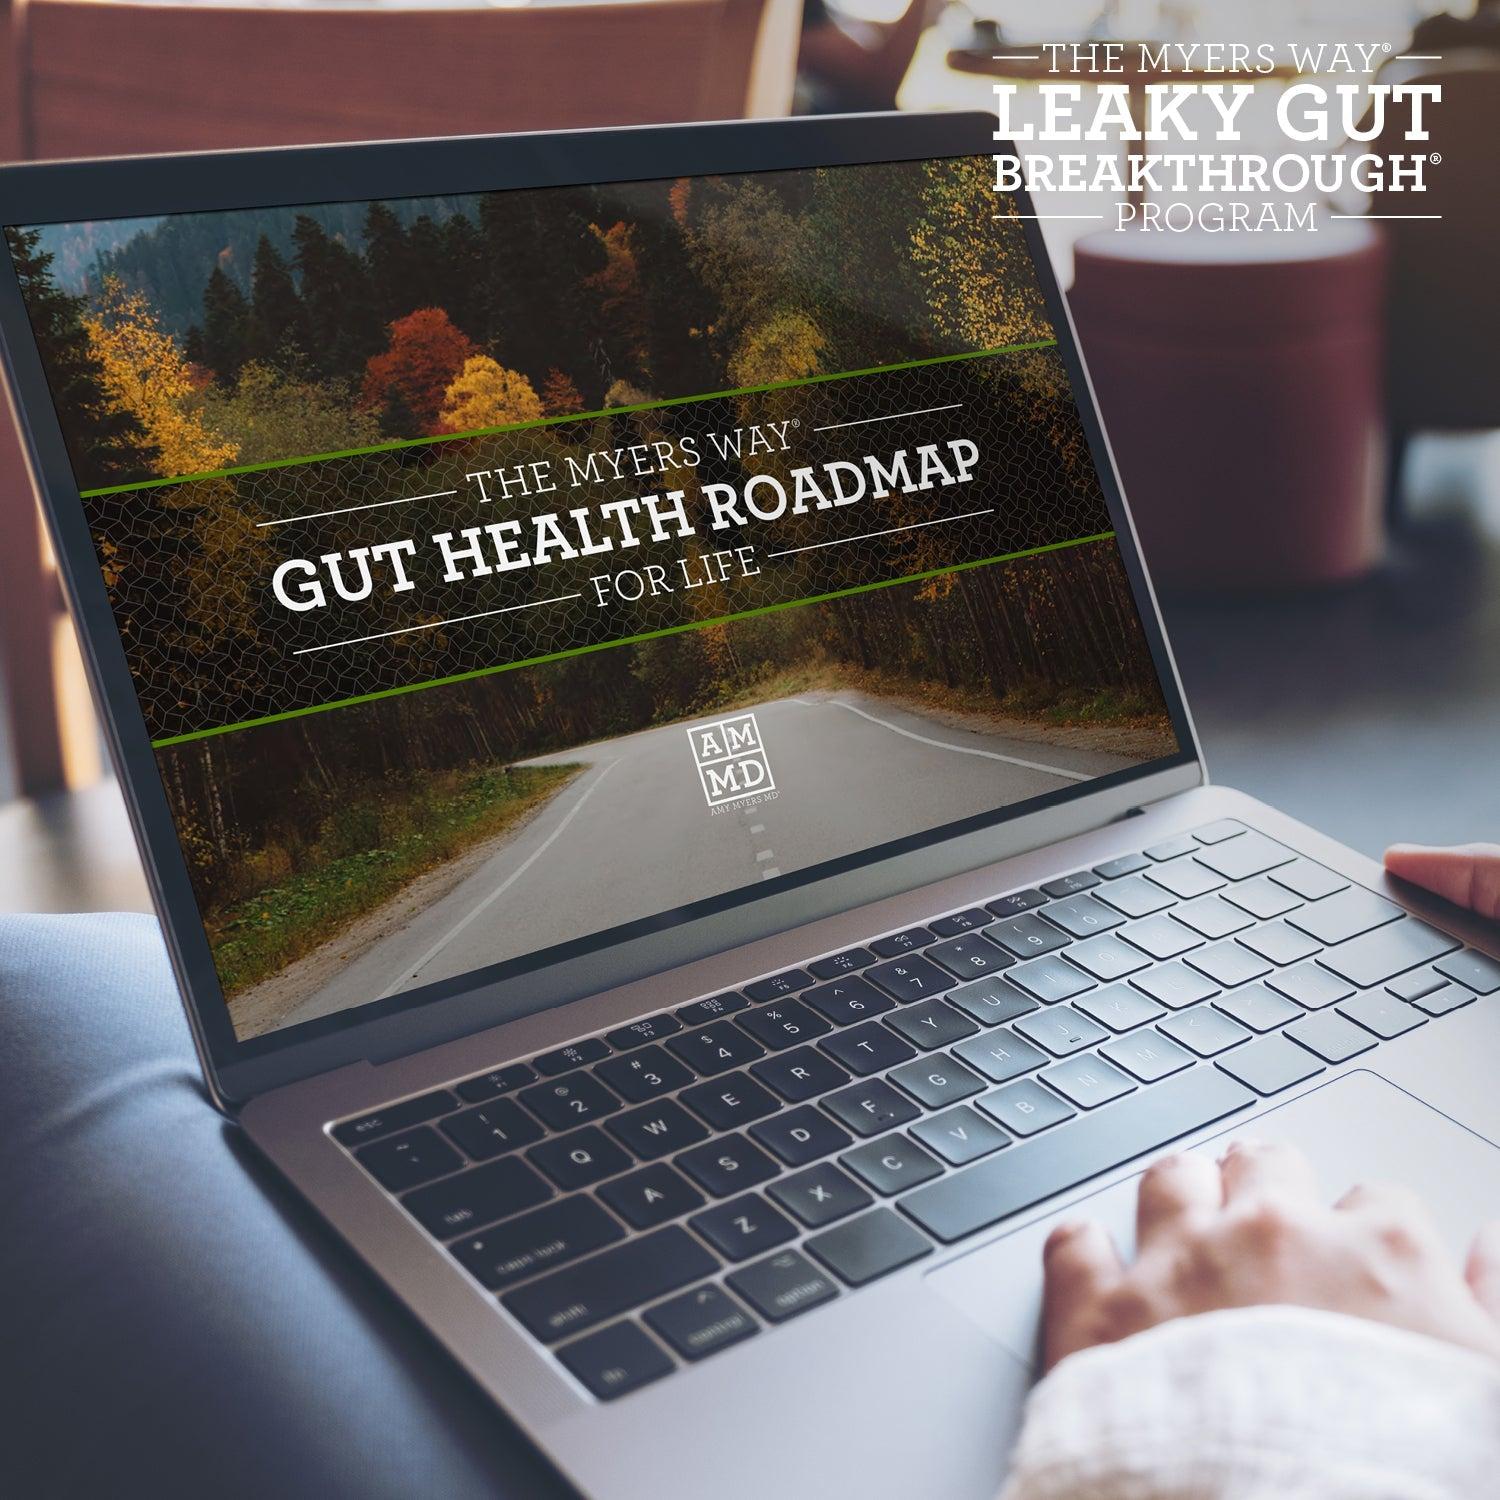 A Woman views the Leaky Gut Breakthrough Program Gut Health Roadmap on a laptop computer - Amy Myers MD®